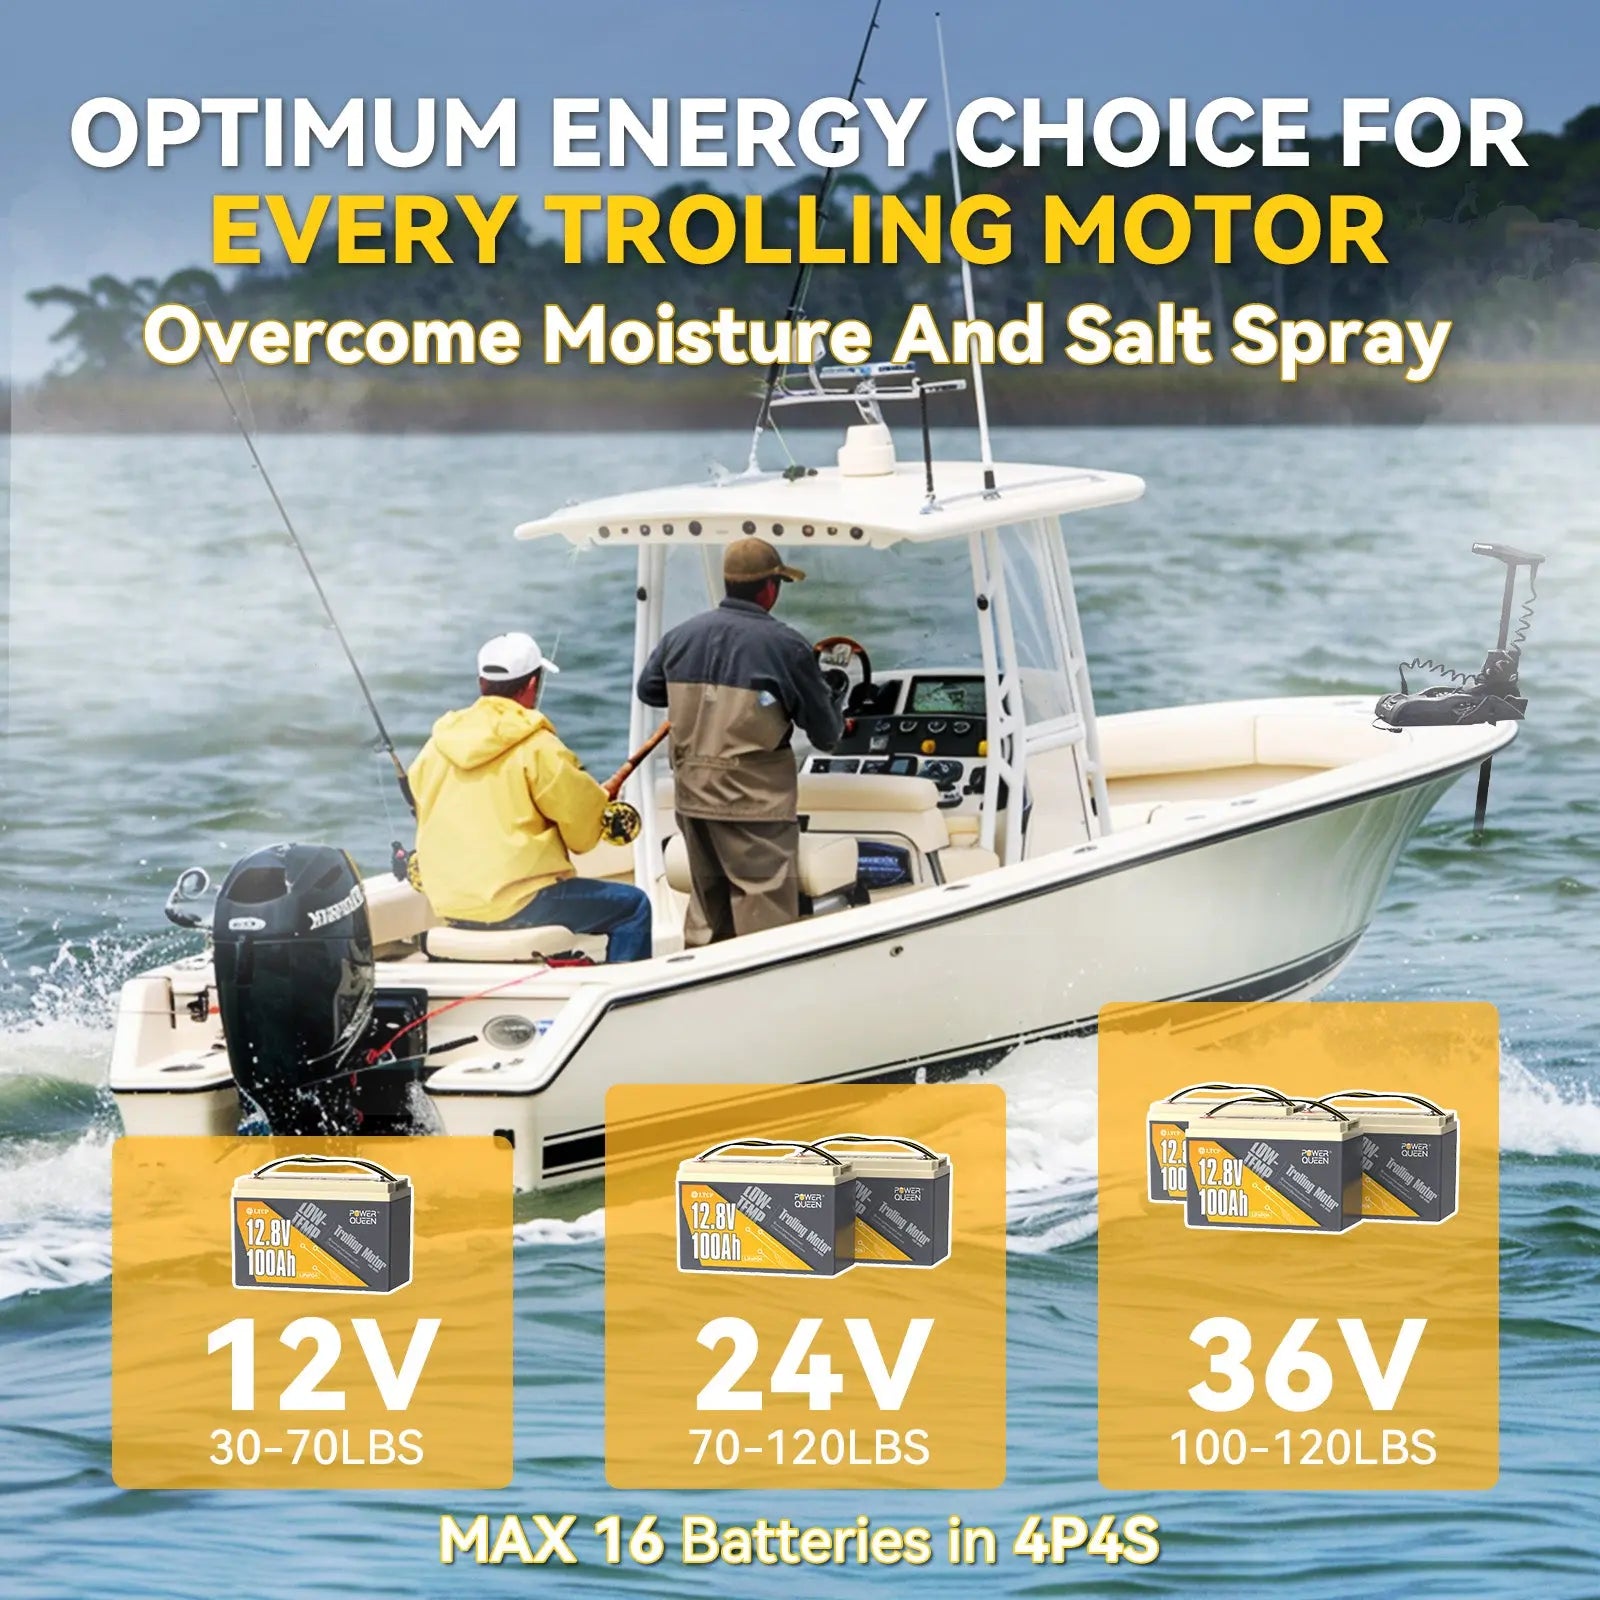 12V 100Ah Low-Temp Deep Cycle Lithium Battery a optimum energy choice for every trolling motor